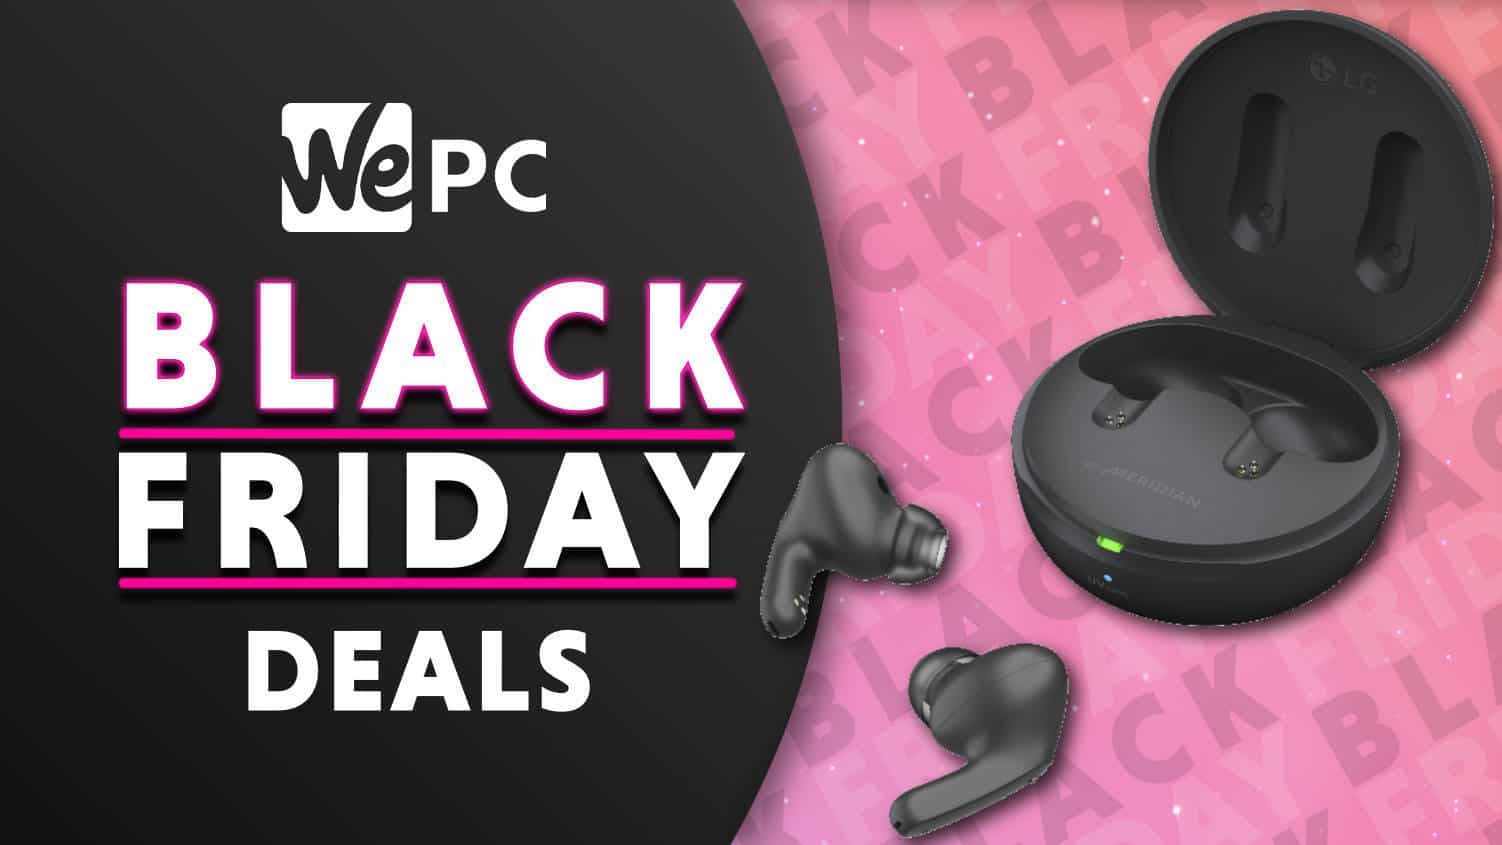 Save 35% on LG TONE earbuds early Black Friday 2021 deals